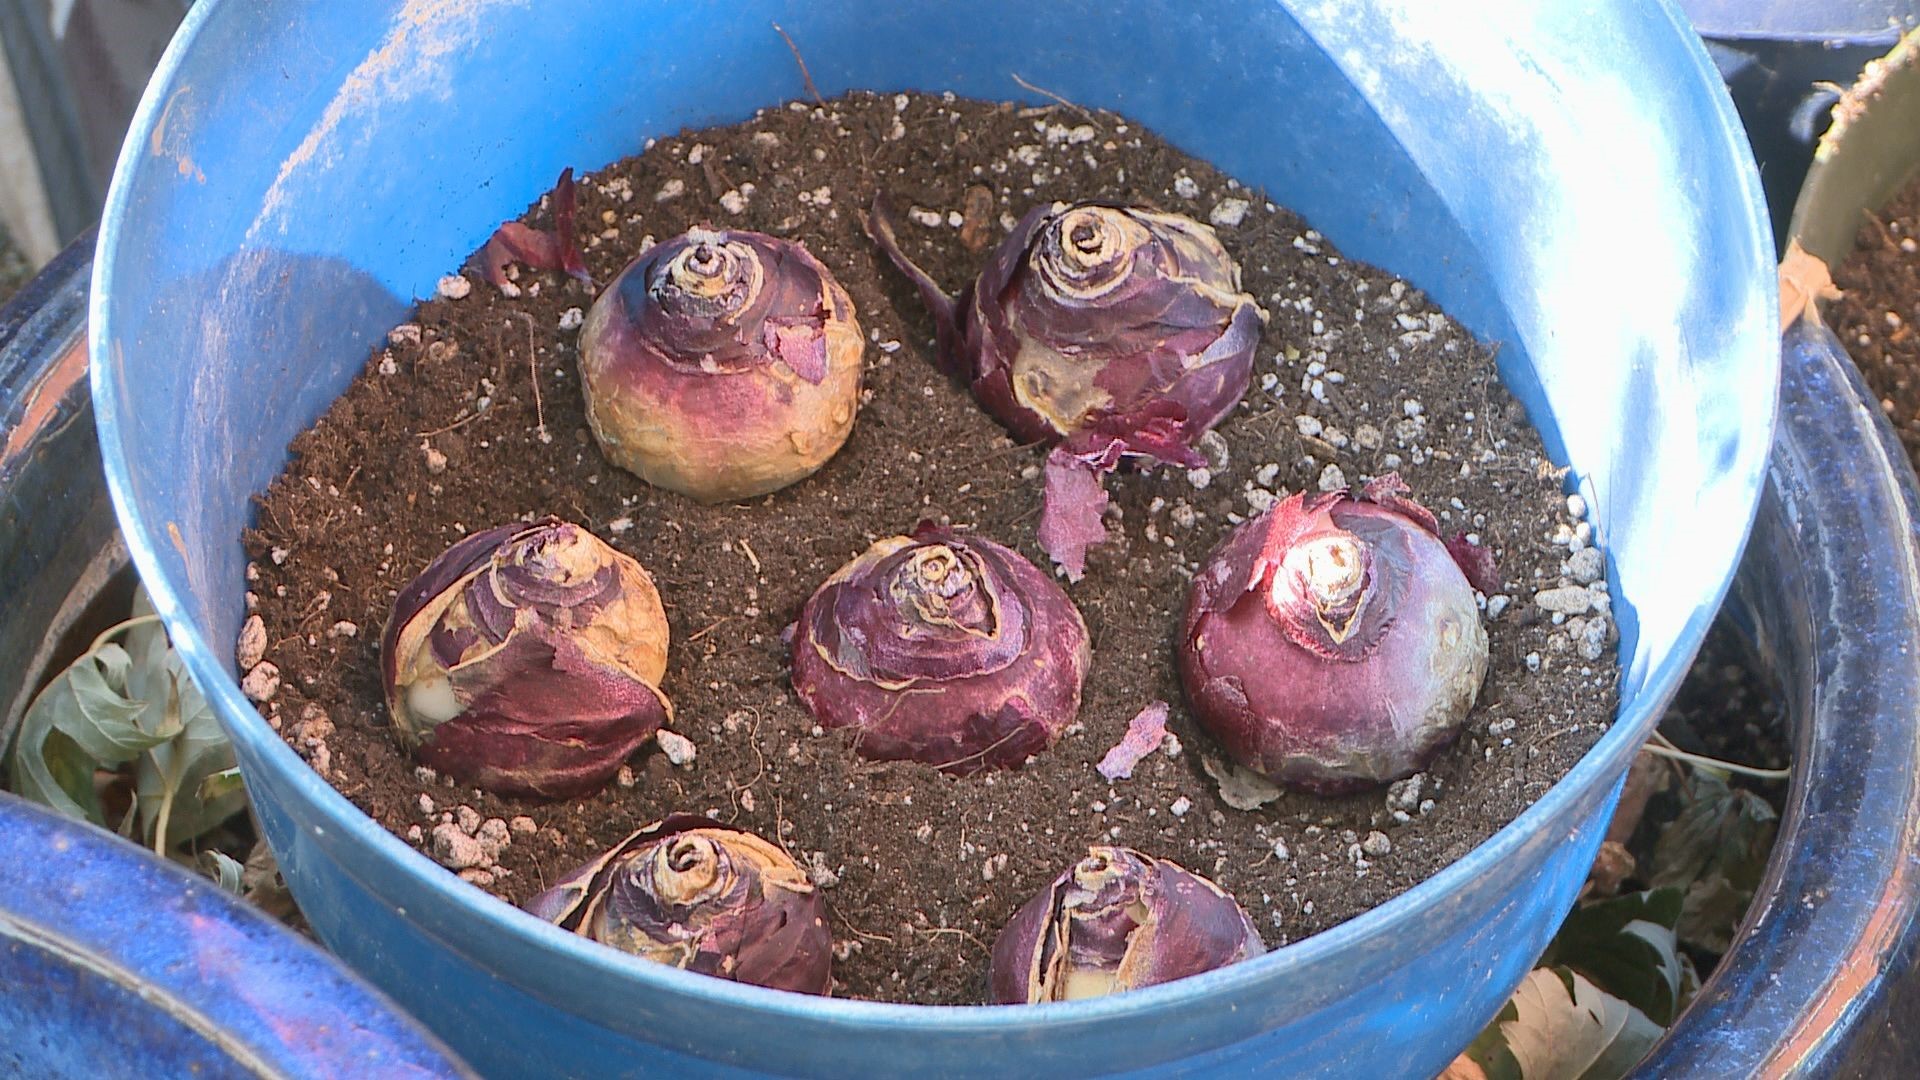 The time to plant your spring bulbs is now. Here are some tips on how to plant them in pots.